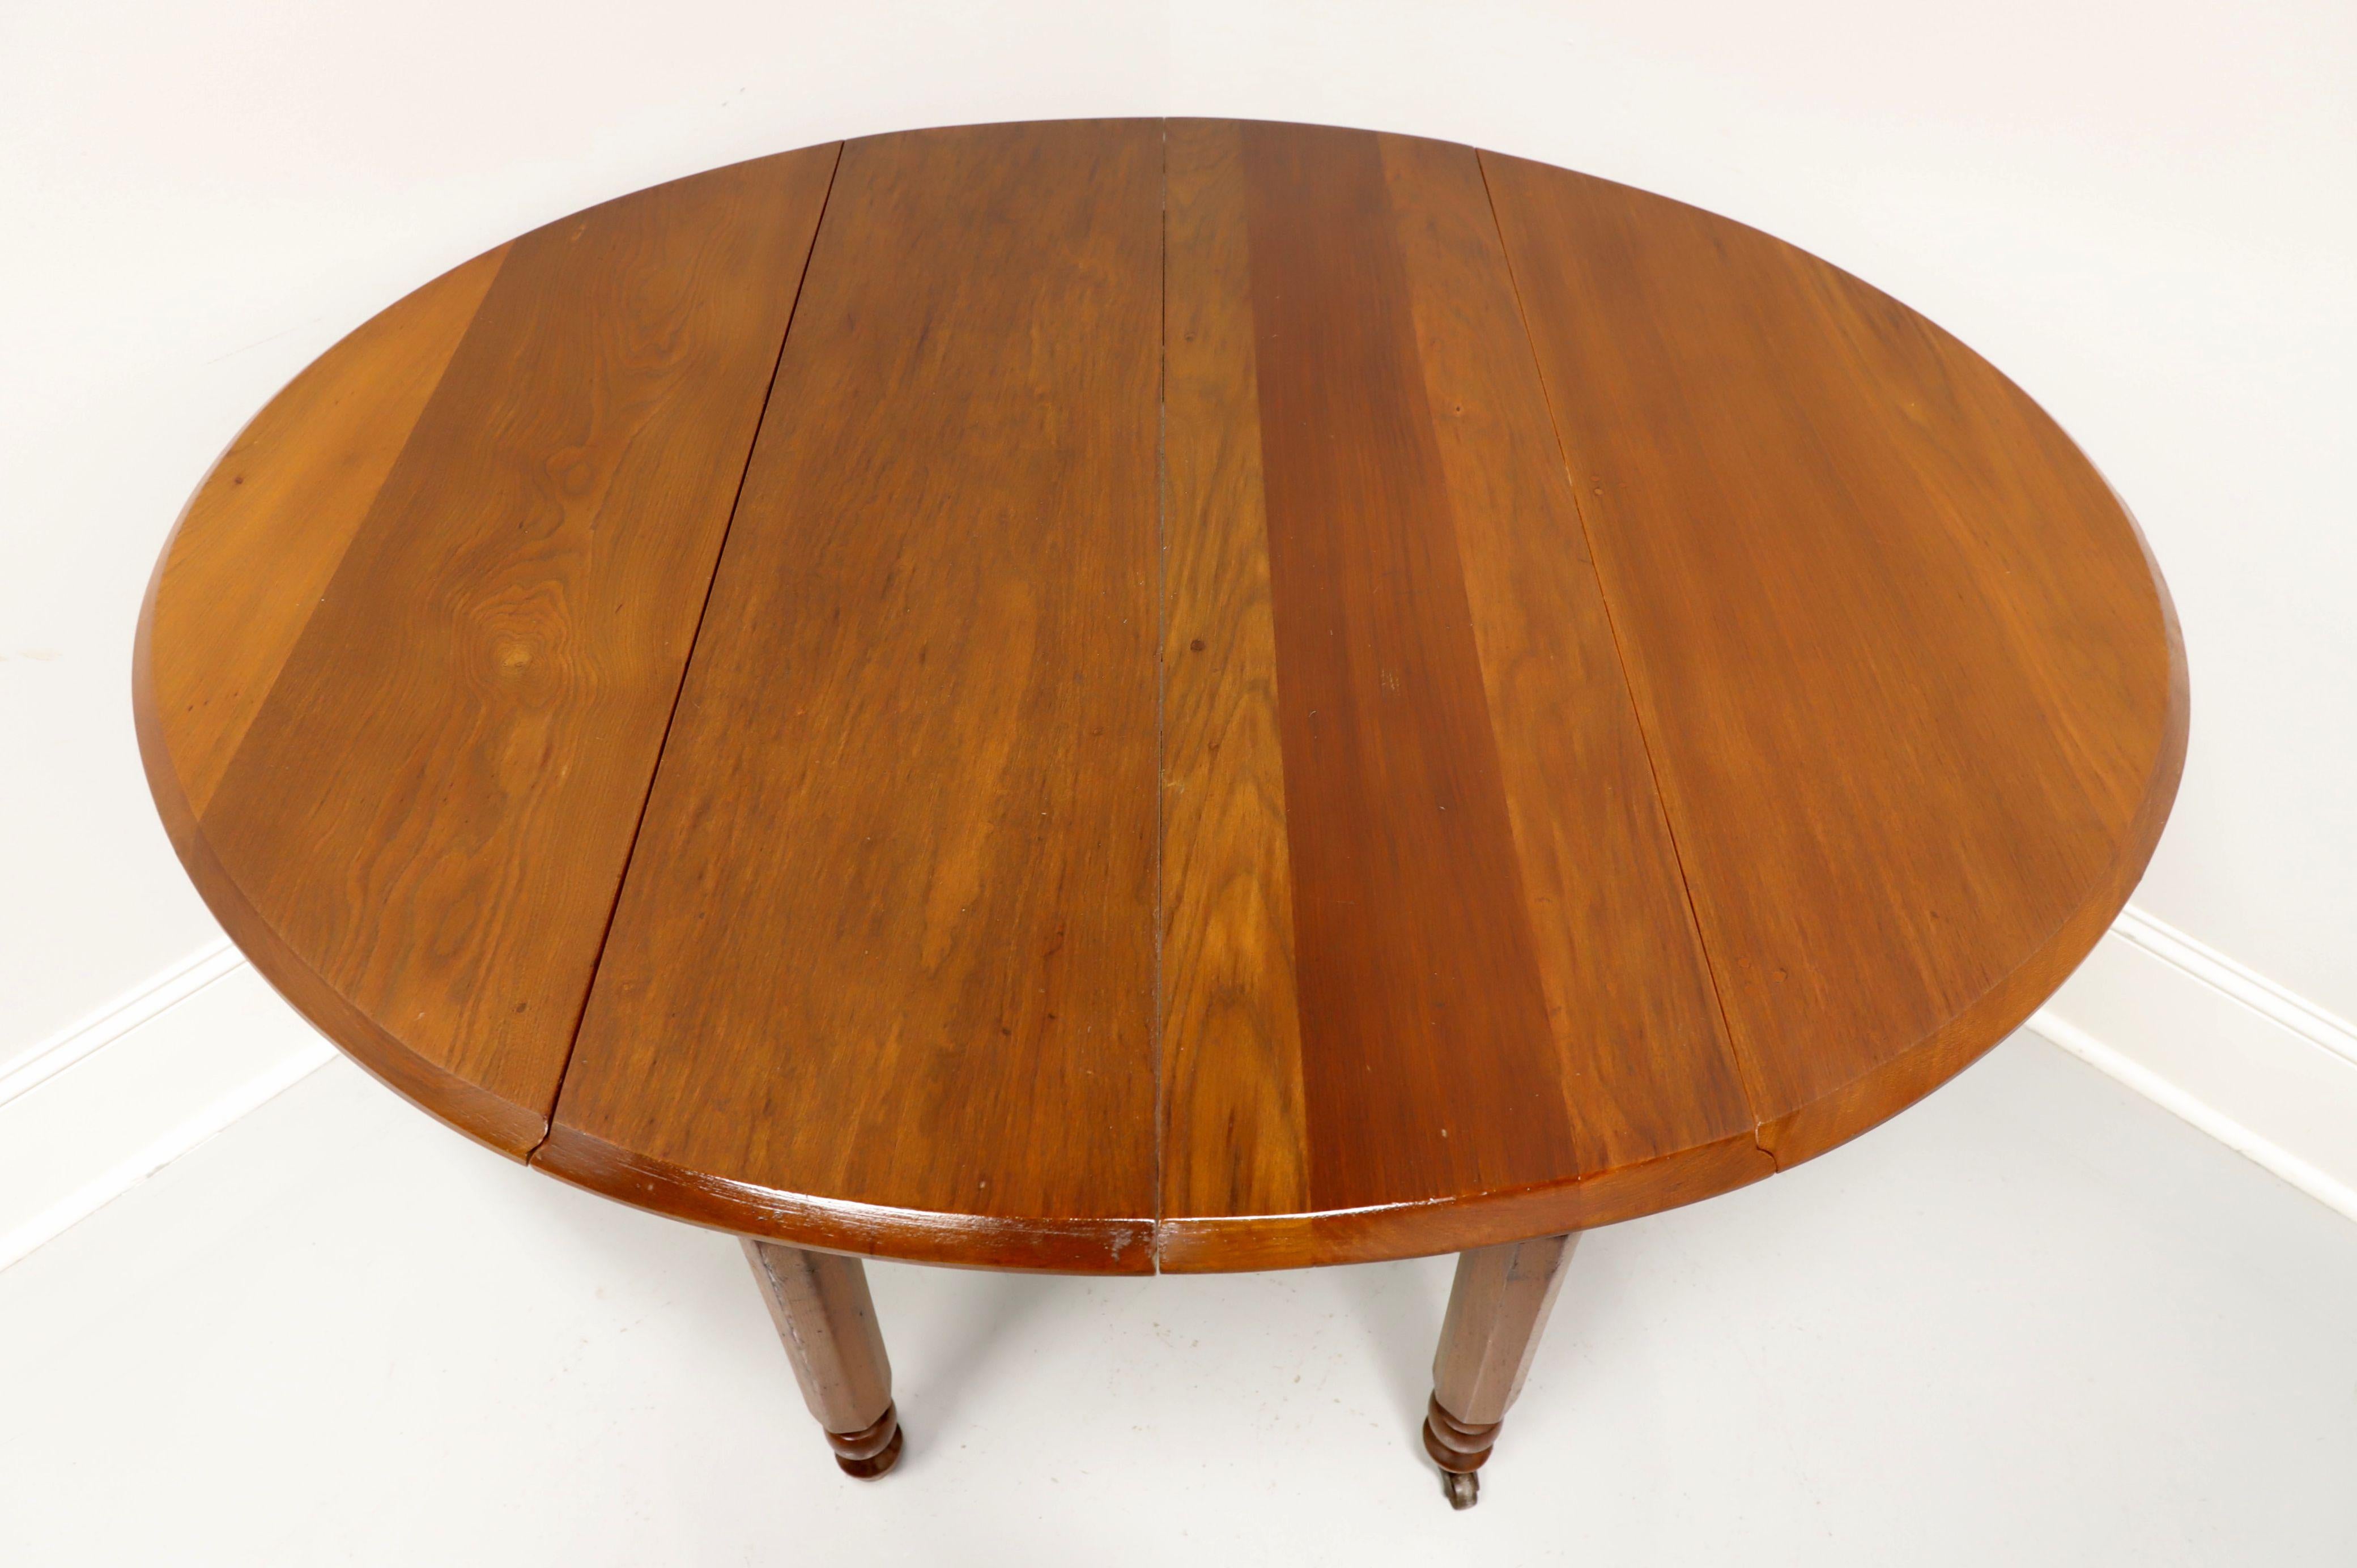 American Colonial Antique Walnut Oval Drop Leaf Dining Table